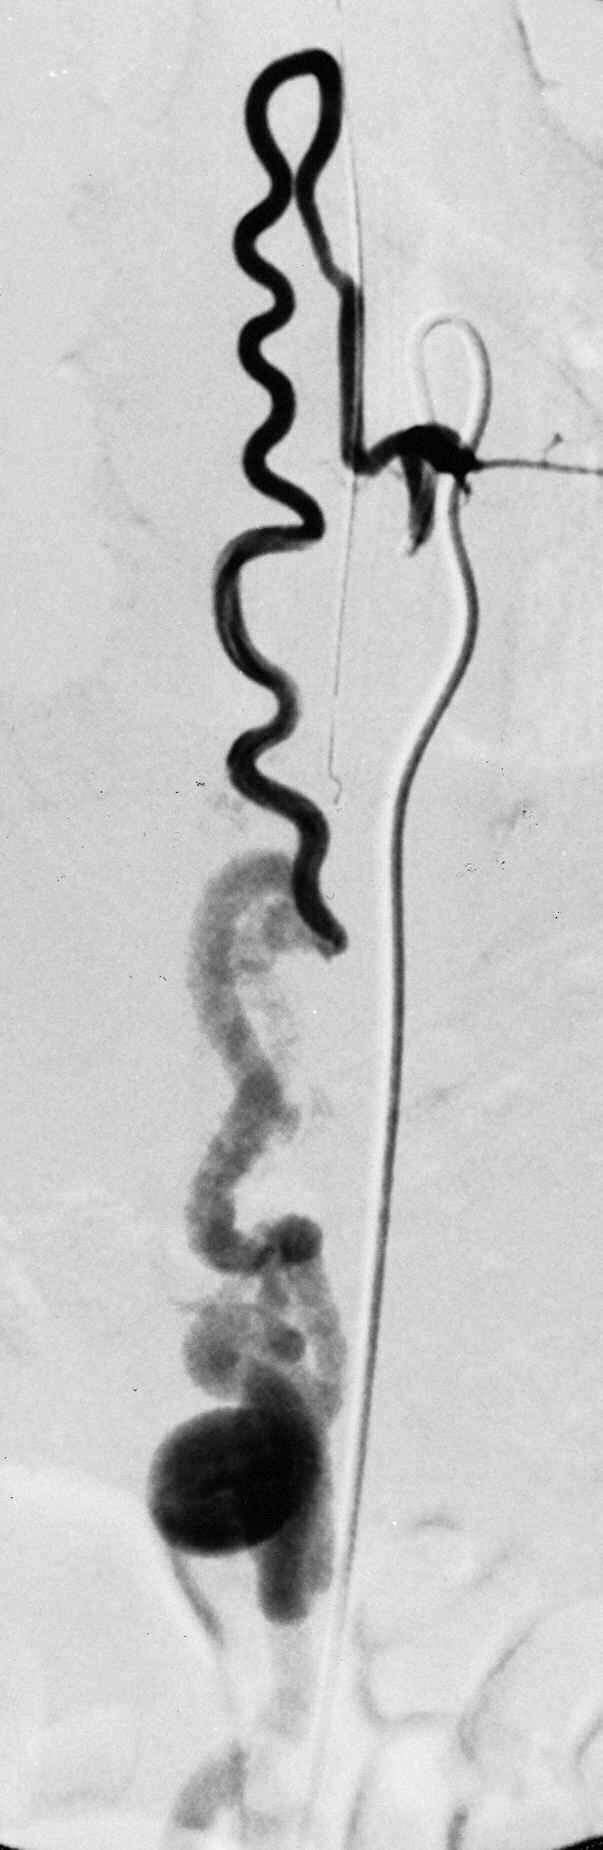 fistula. B) Left 7 th intercostal arteriography shows radiculo-medullary artery connecting to a single hole fistula.at the ventral surface of spinal cord at th elevel Th10.